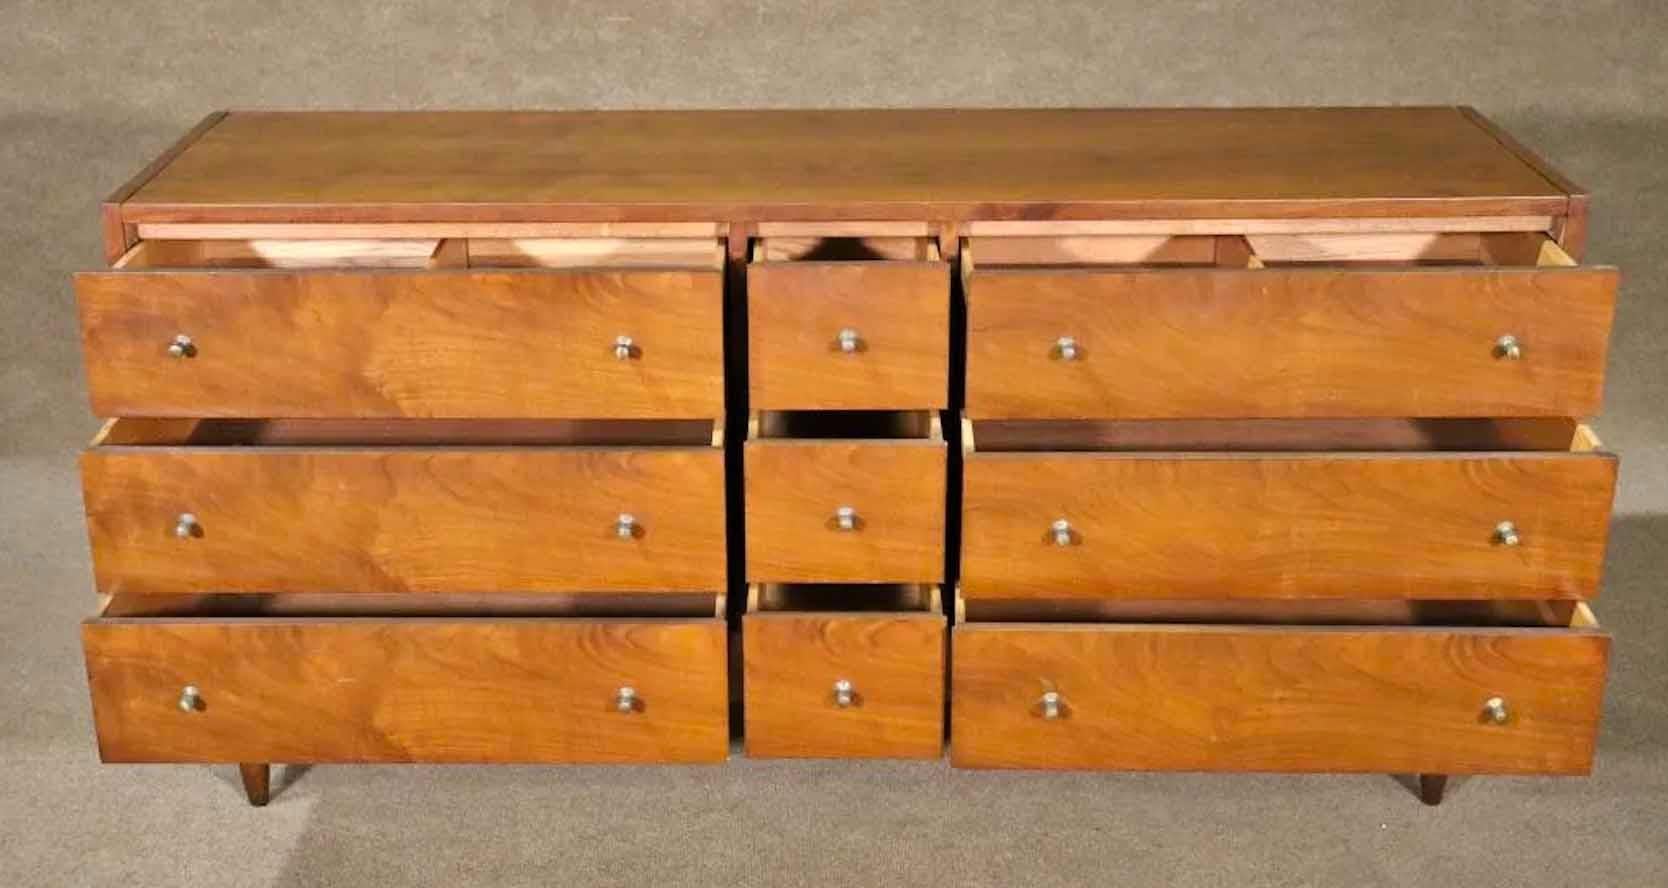 Long Mid-Century Modern dresser with nine drawers. Metal drawer pulls and walnut wood grain.
Please confirm location.